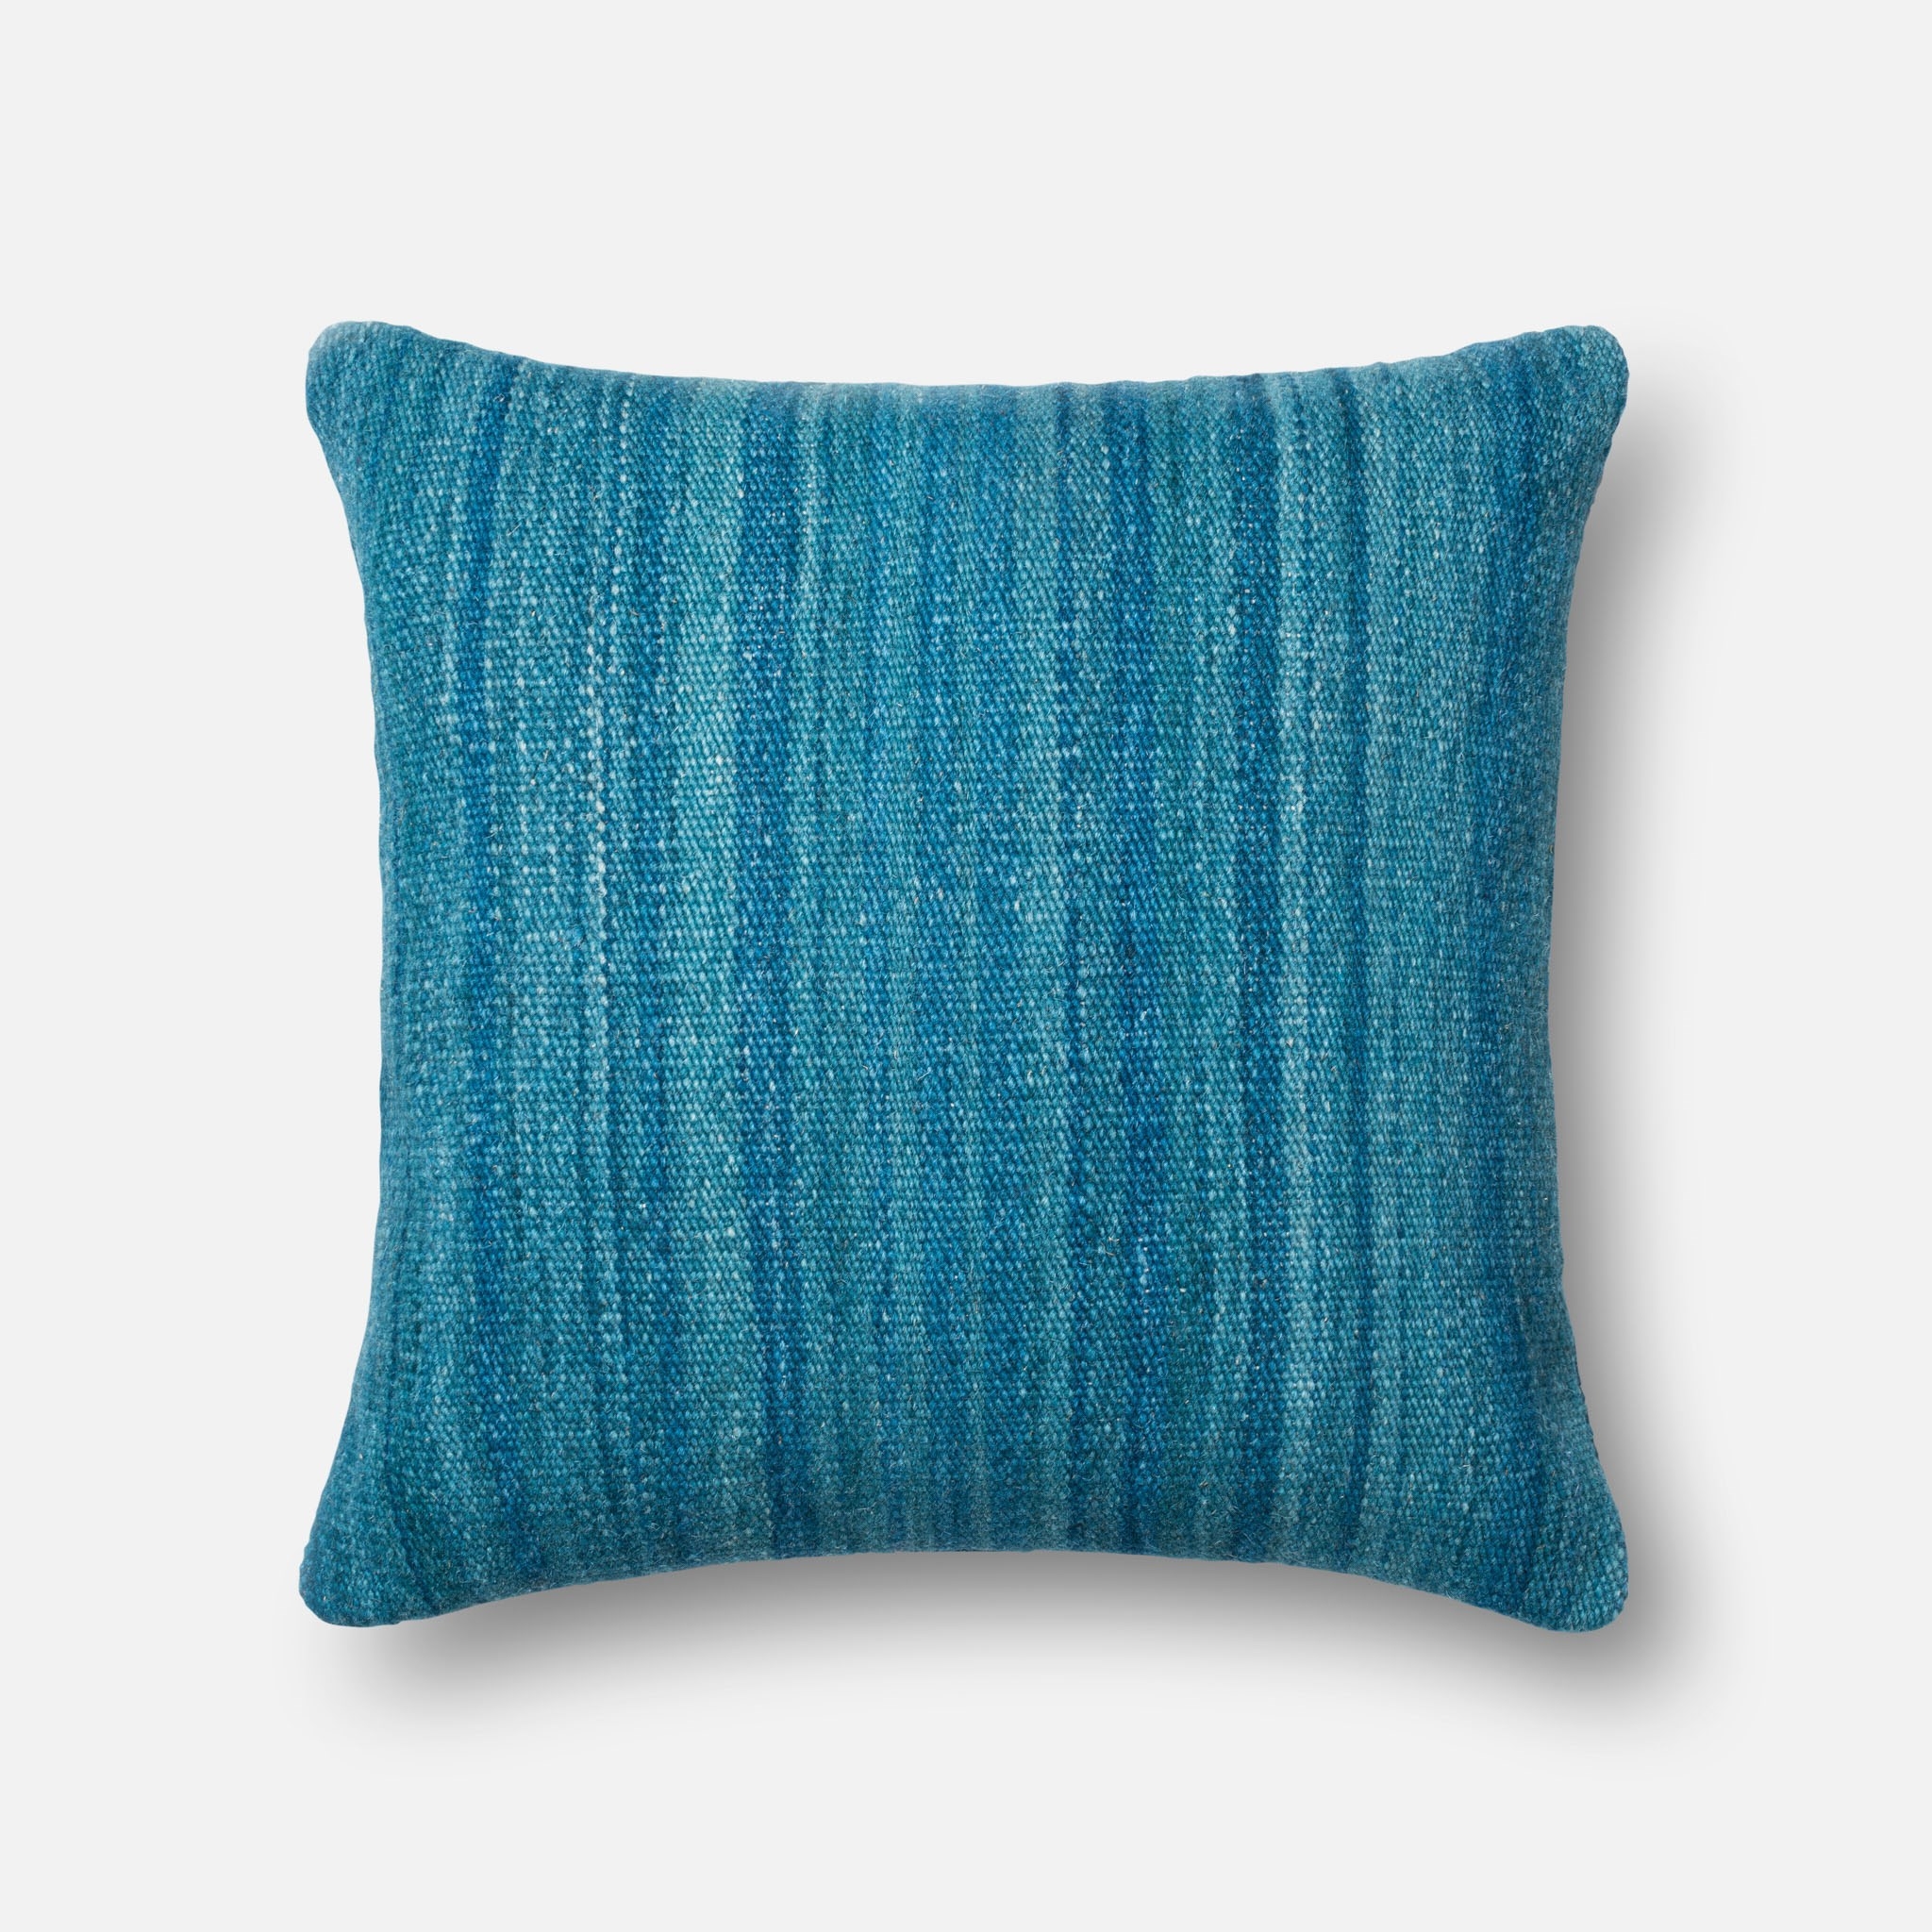 P0167 BLUE 22" x 22" Pillow - With insert - Image 0